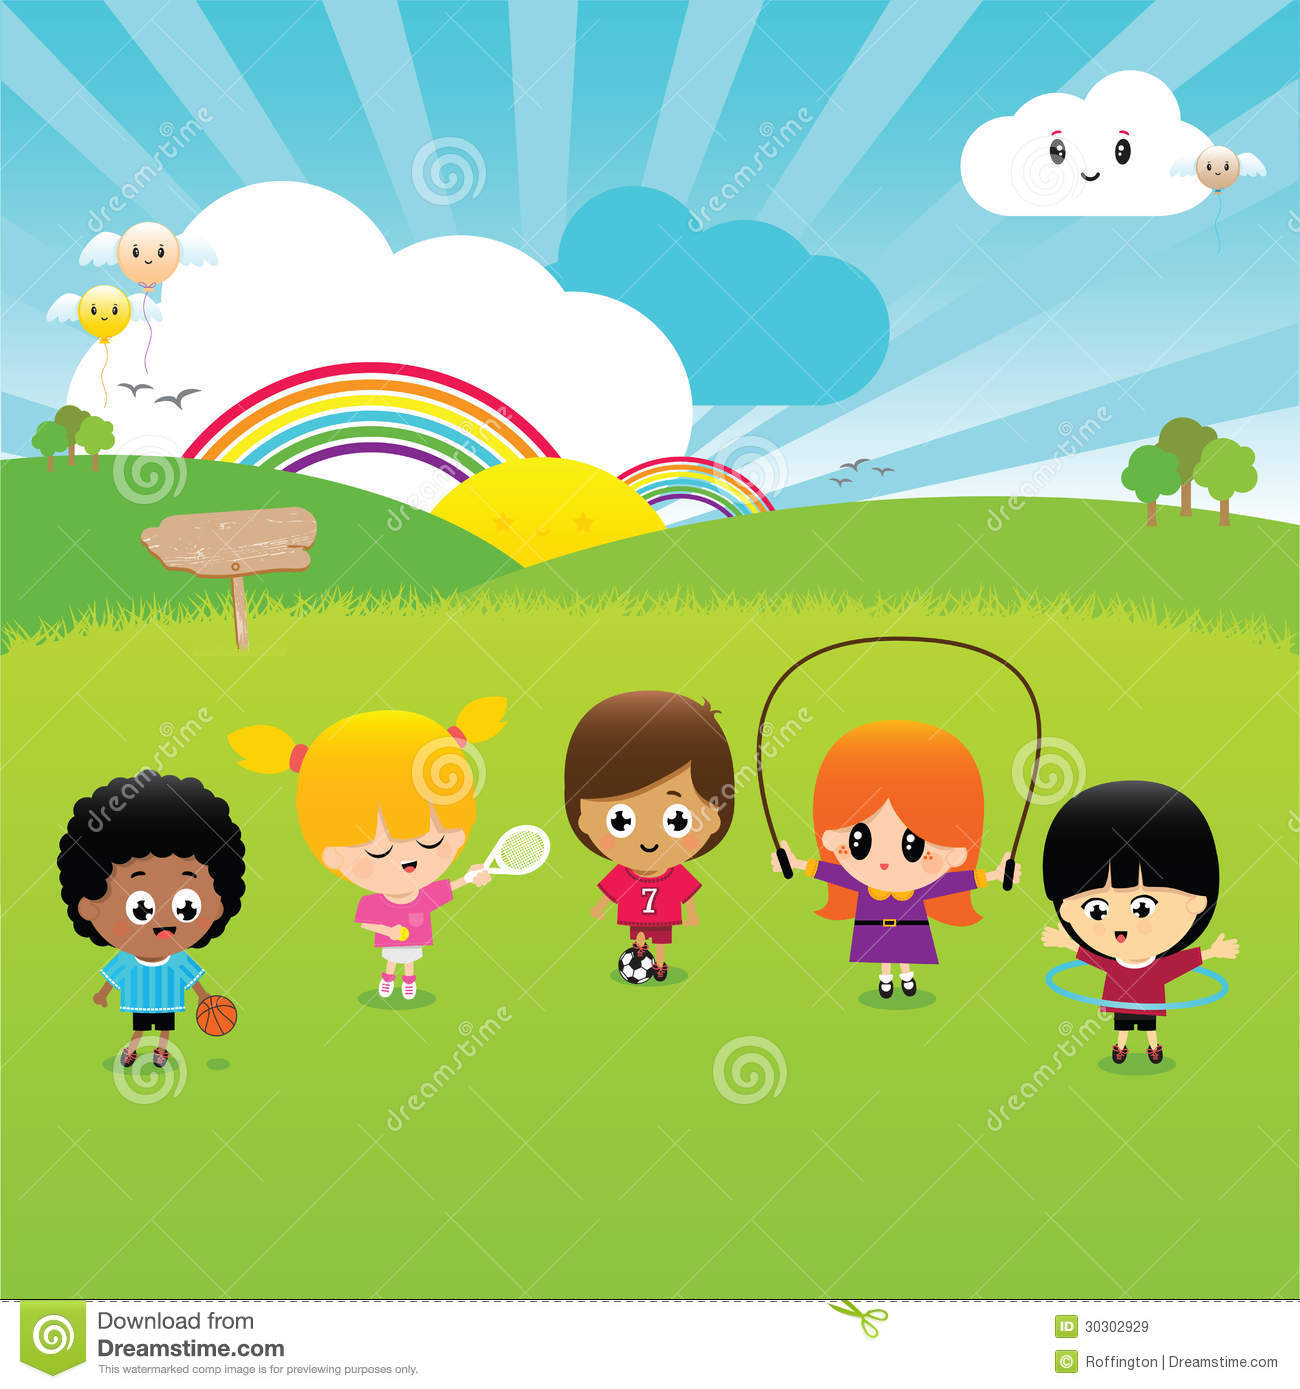 Exercising And Playing Sports Outdoors With Rainbows And Sunshine